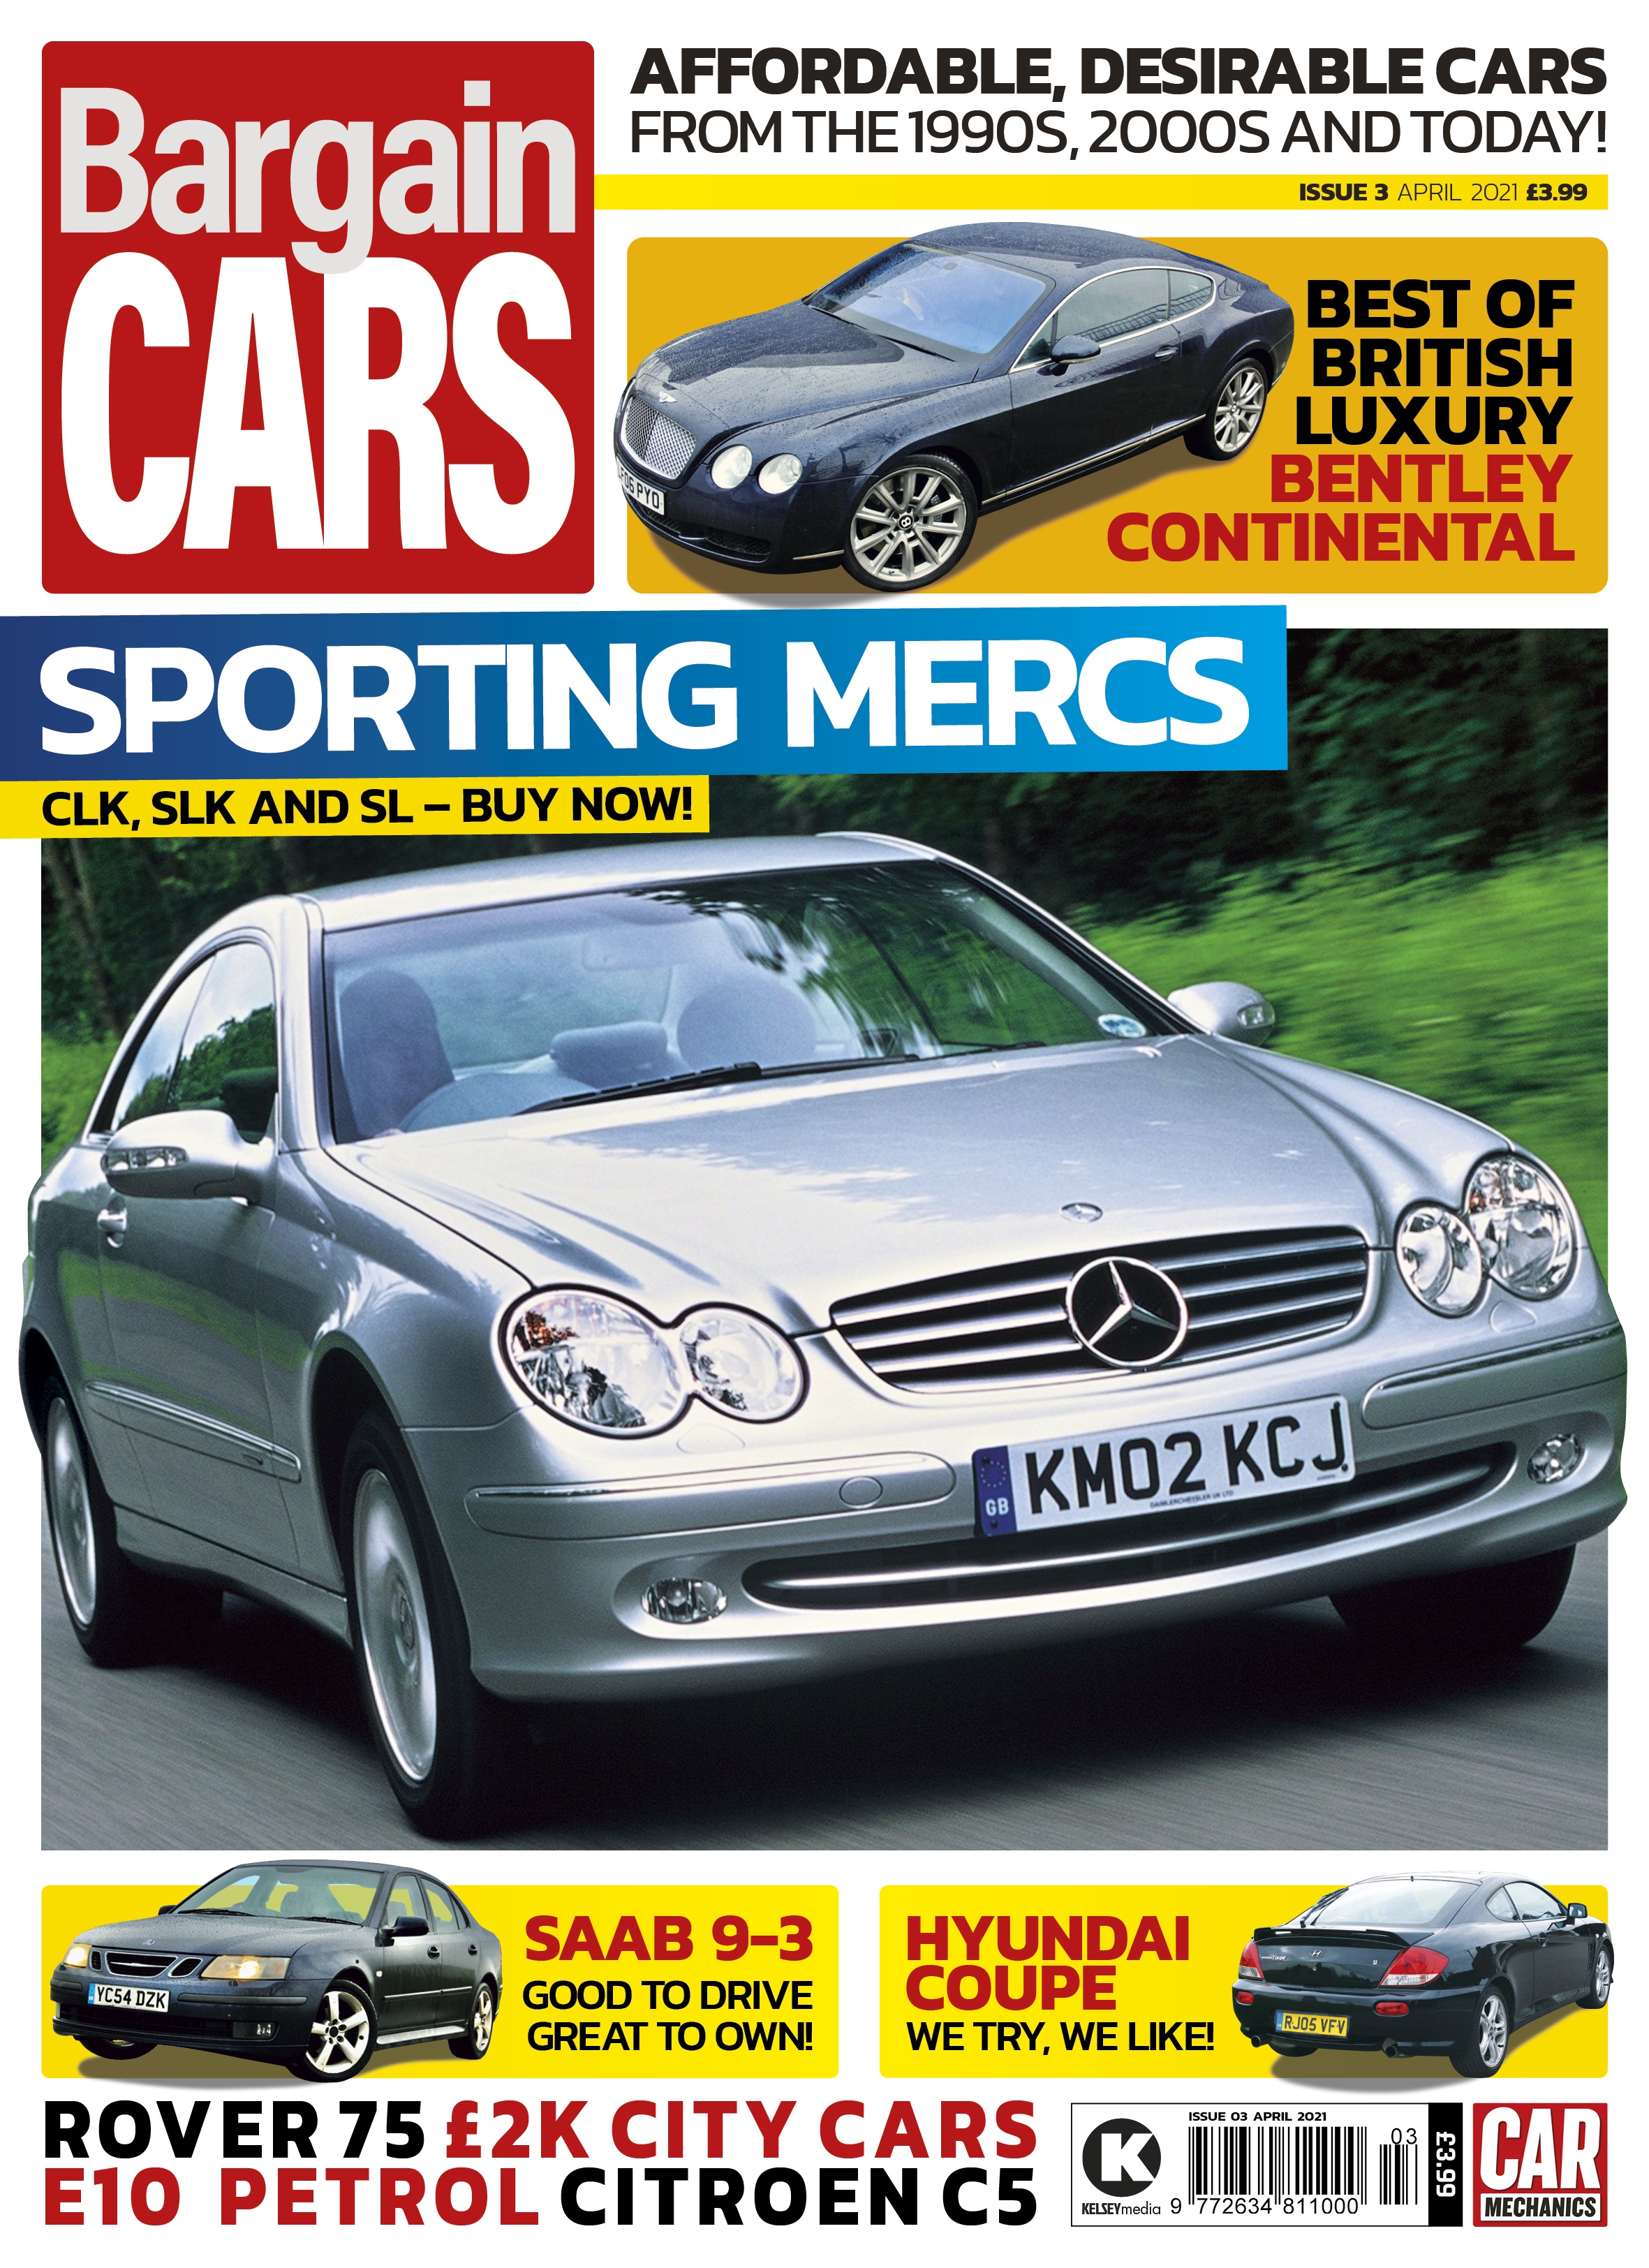 Bargain Cars Issue 3 - April 21